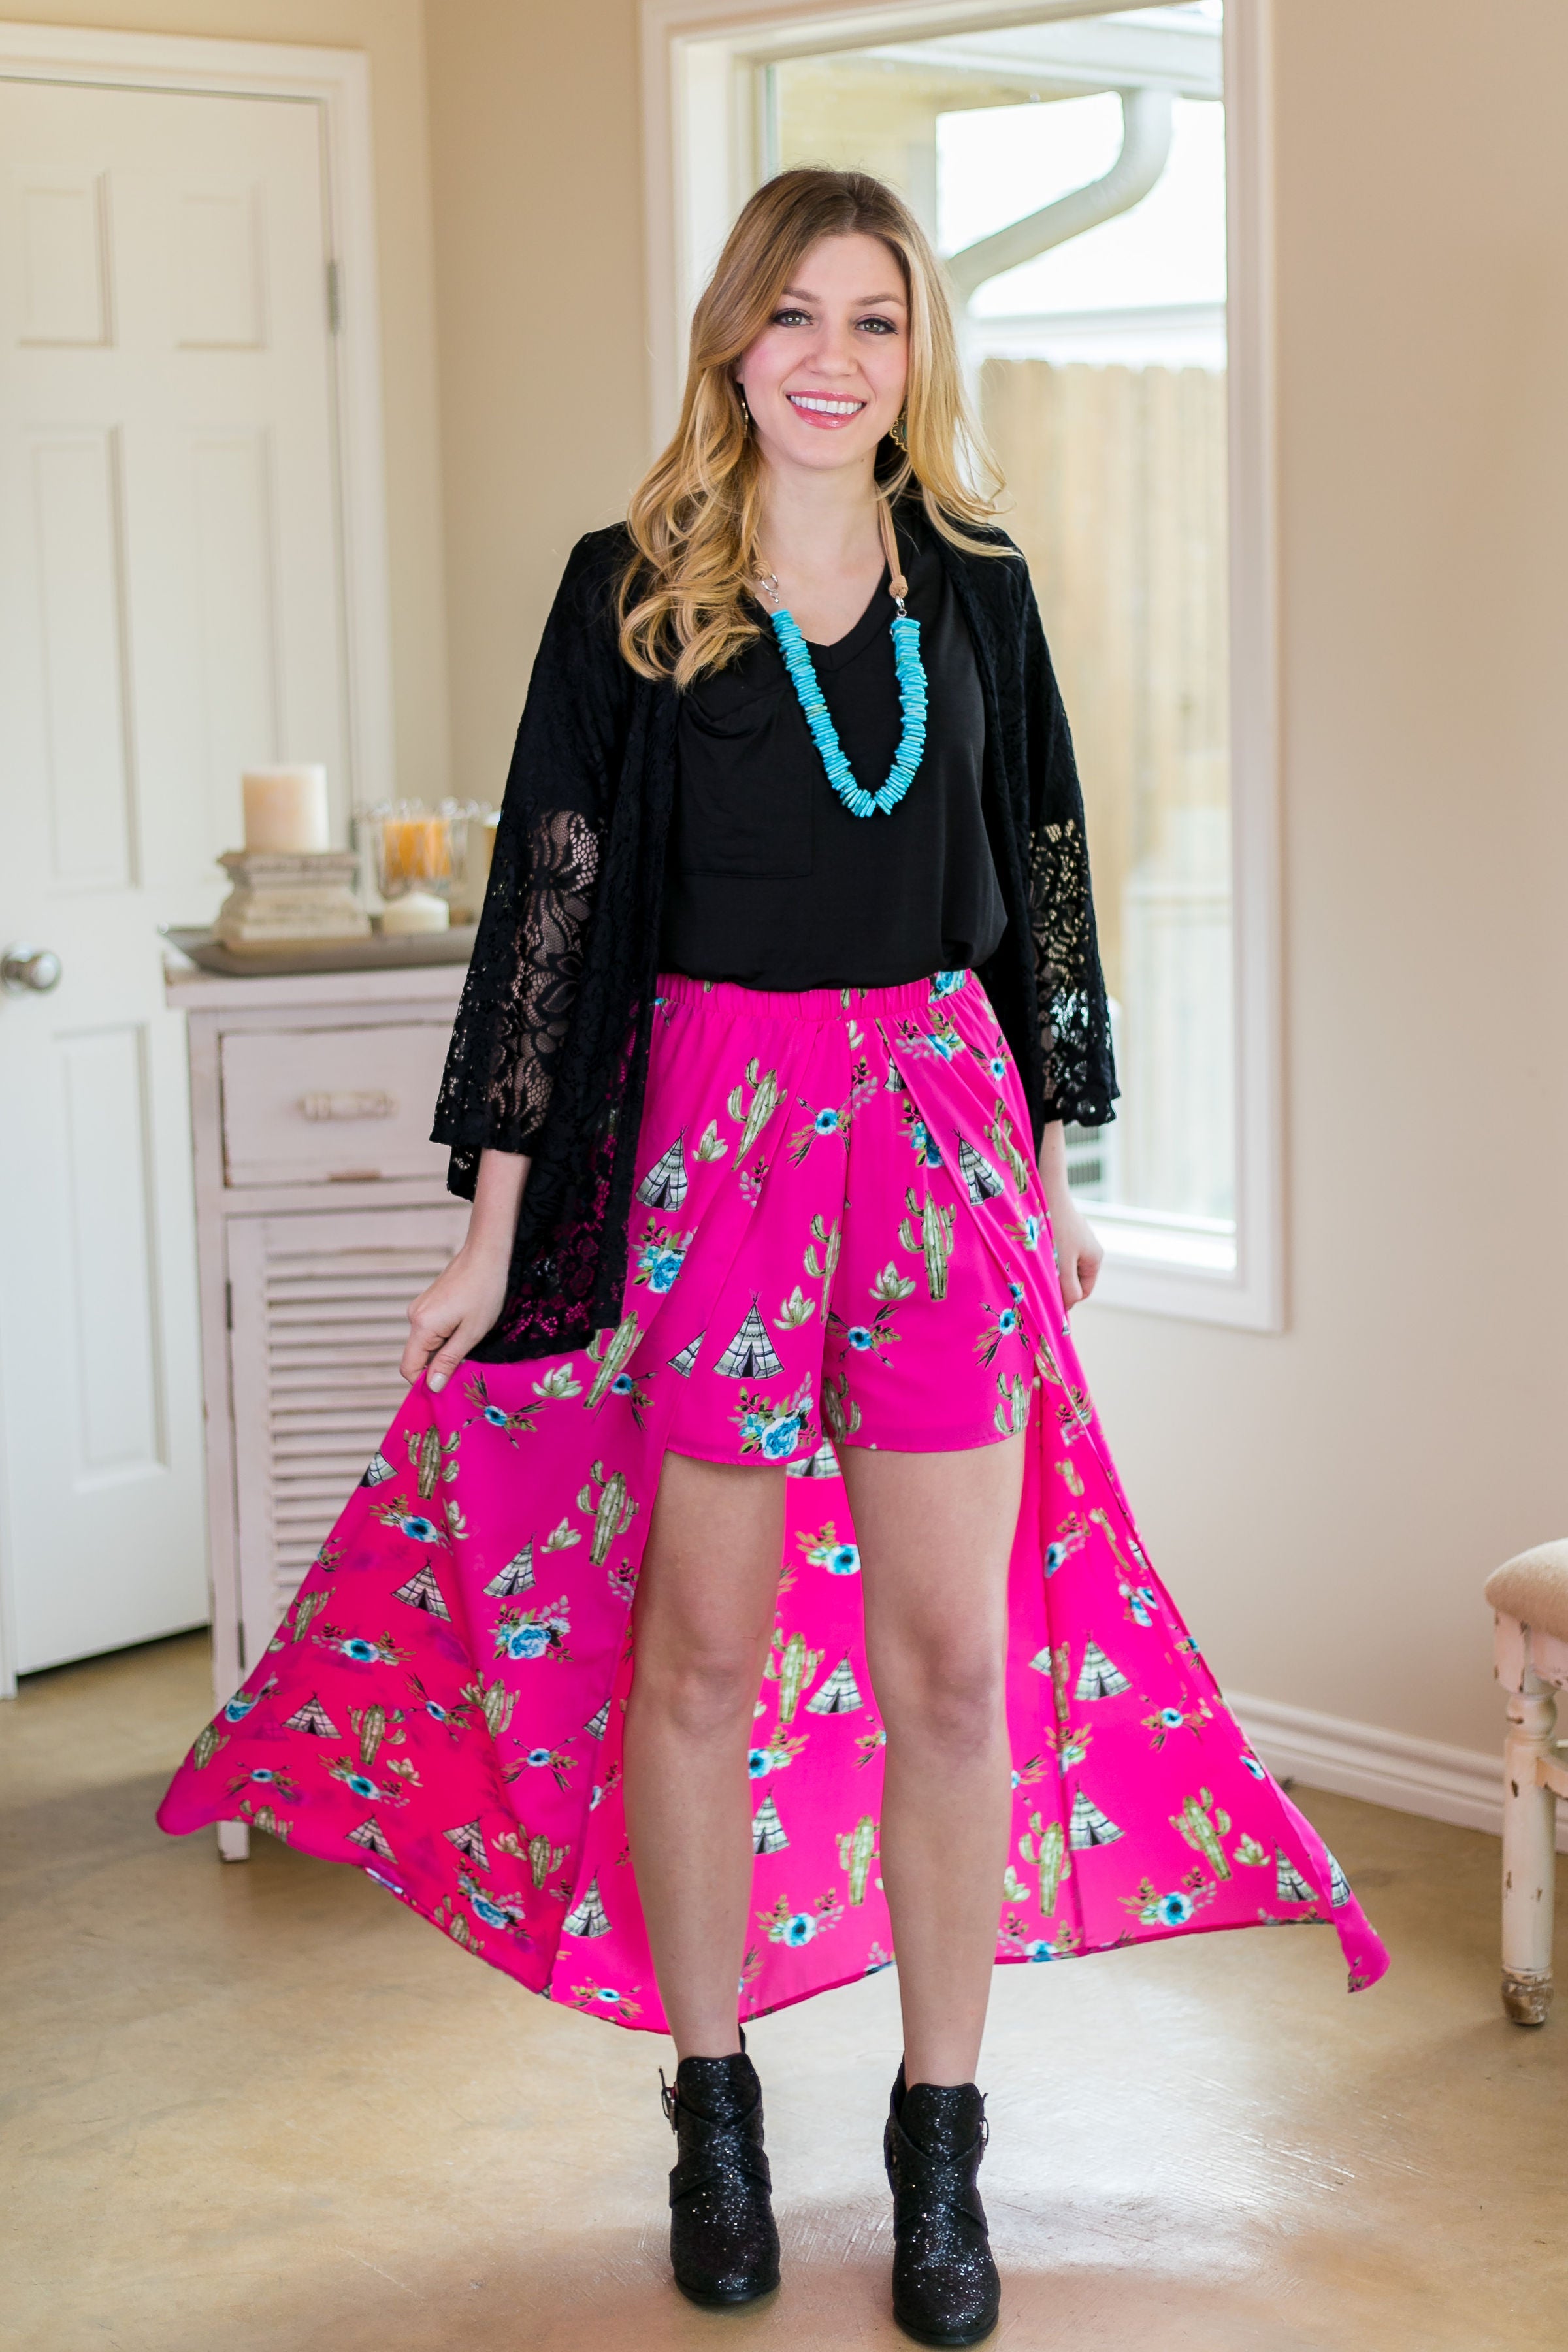 One in a Million Tee Pee and Cactus Maxi Skort in Hot Pink - Giddy Up Glamour Boutique